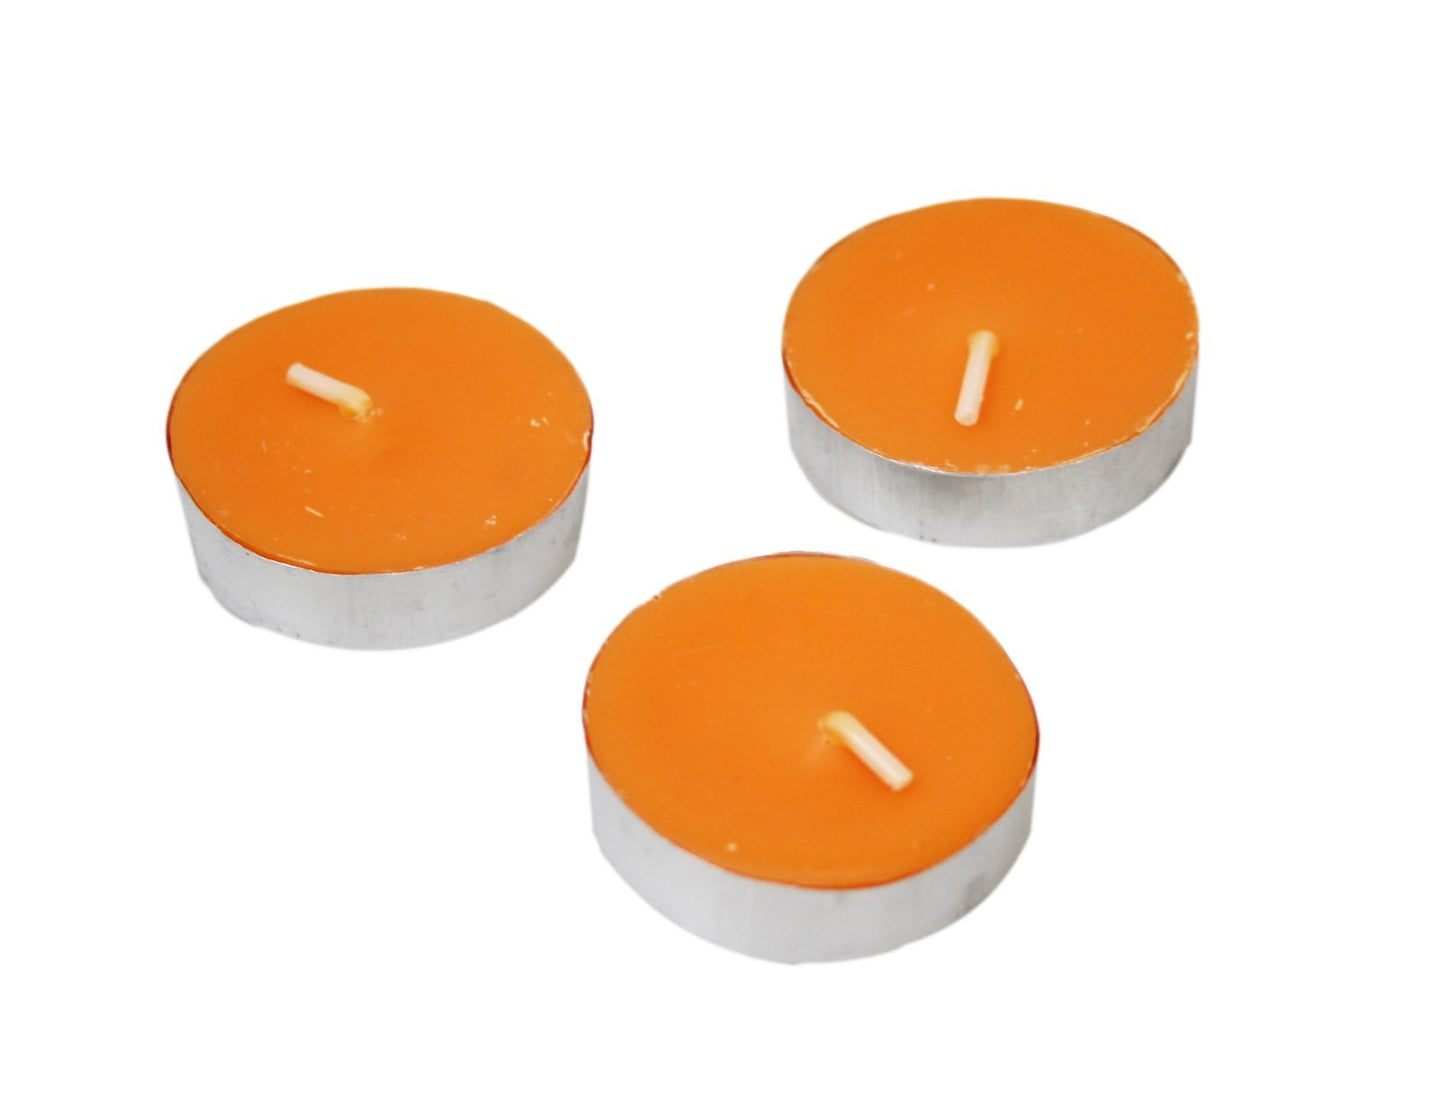 Beautifully Scented Opella Sicilian Citrus 12 Tealight Candles 3.5 Hour Burn Time CD001S (Parcel Rate)